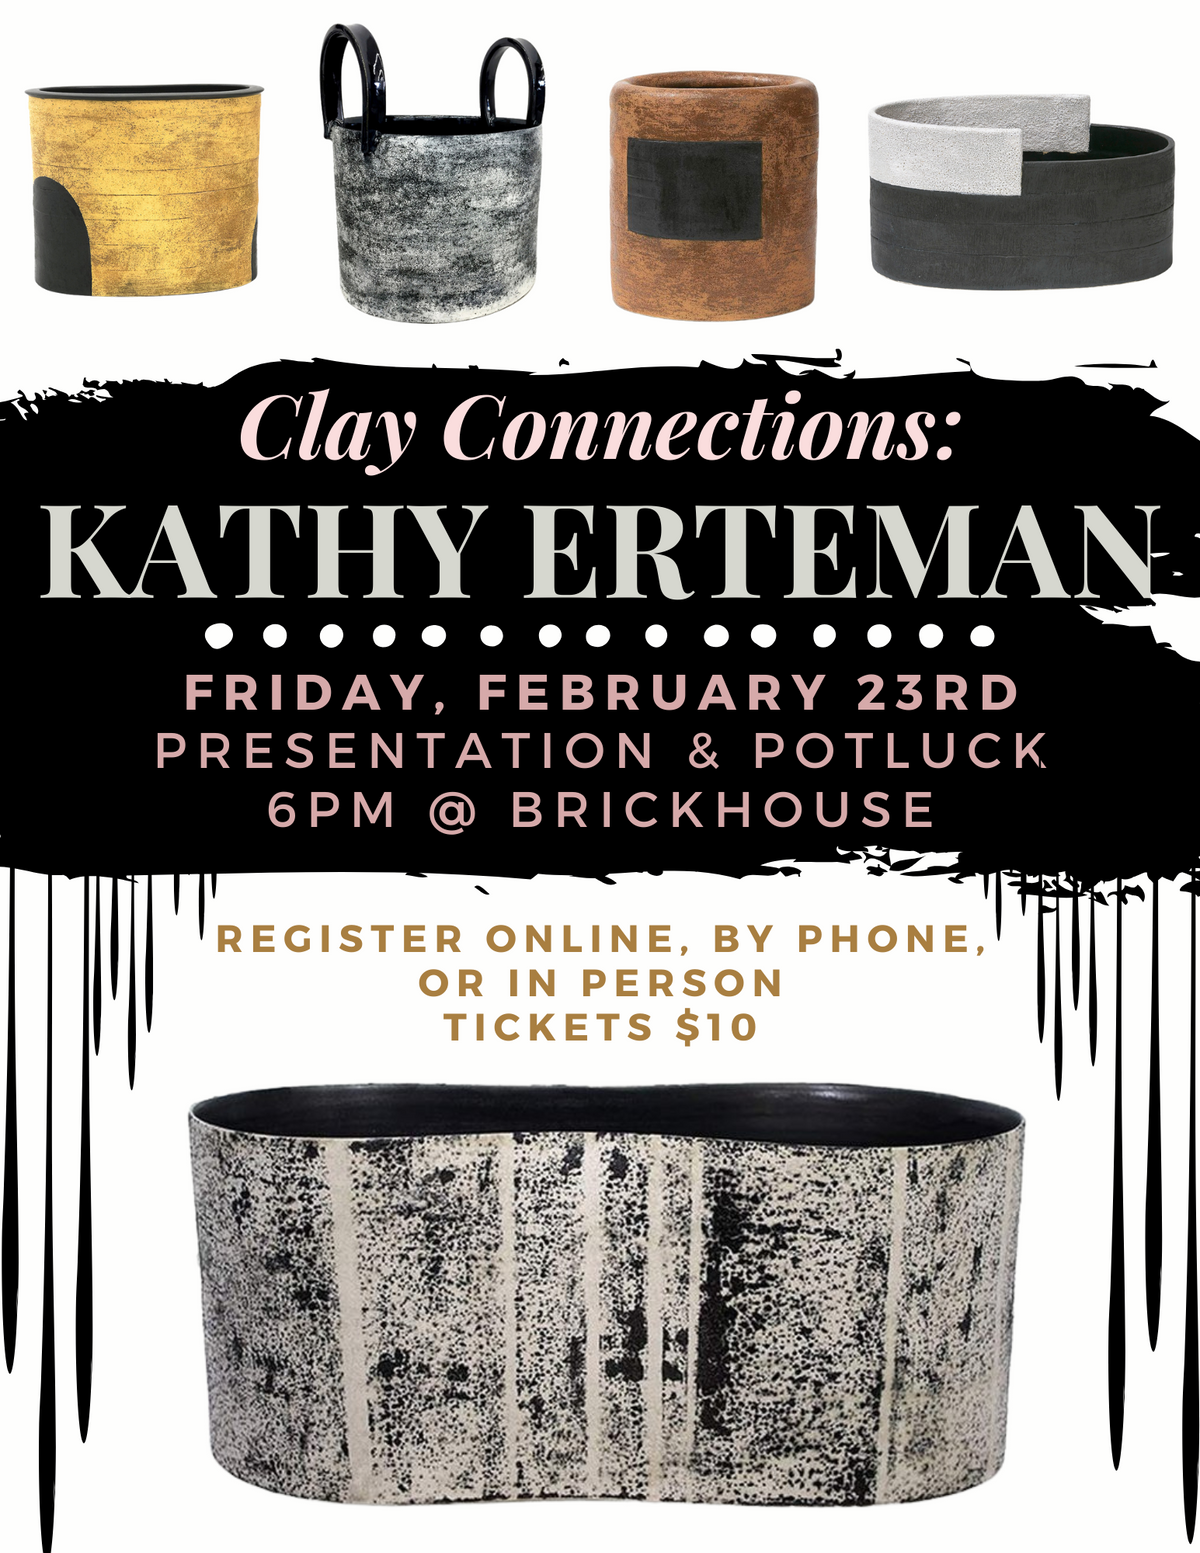 Clay Connections with Kathy Erteman